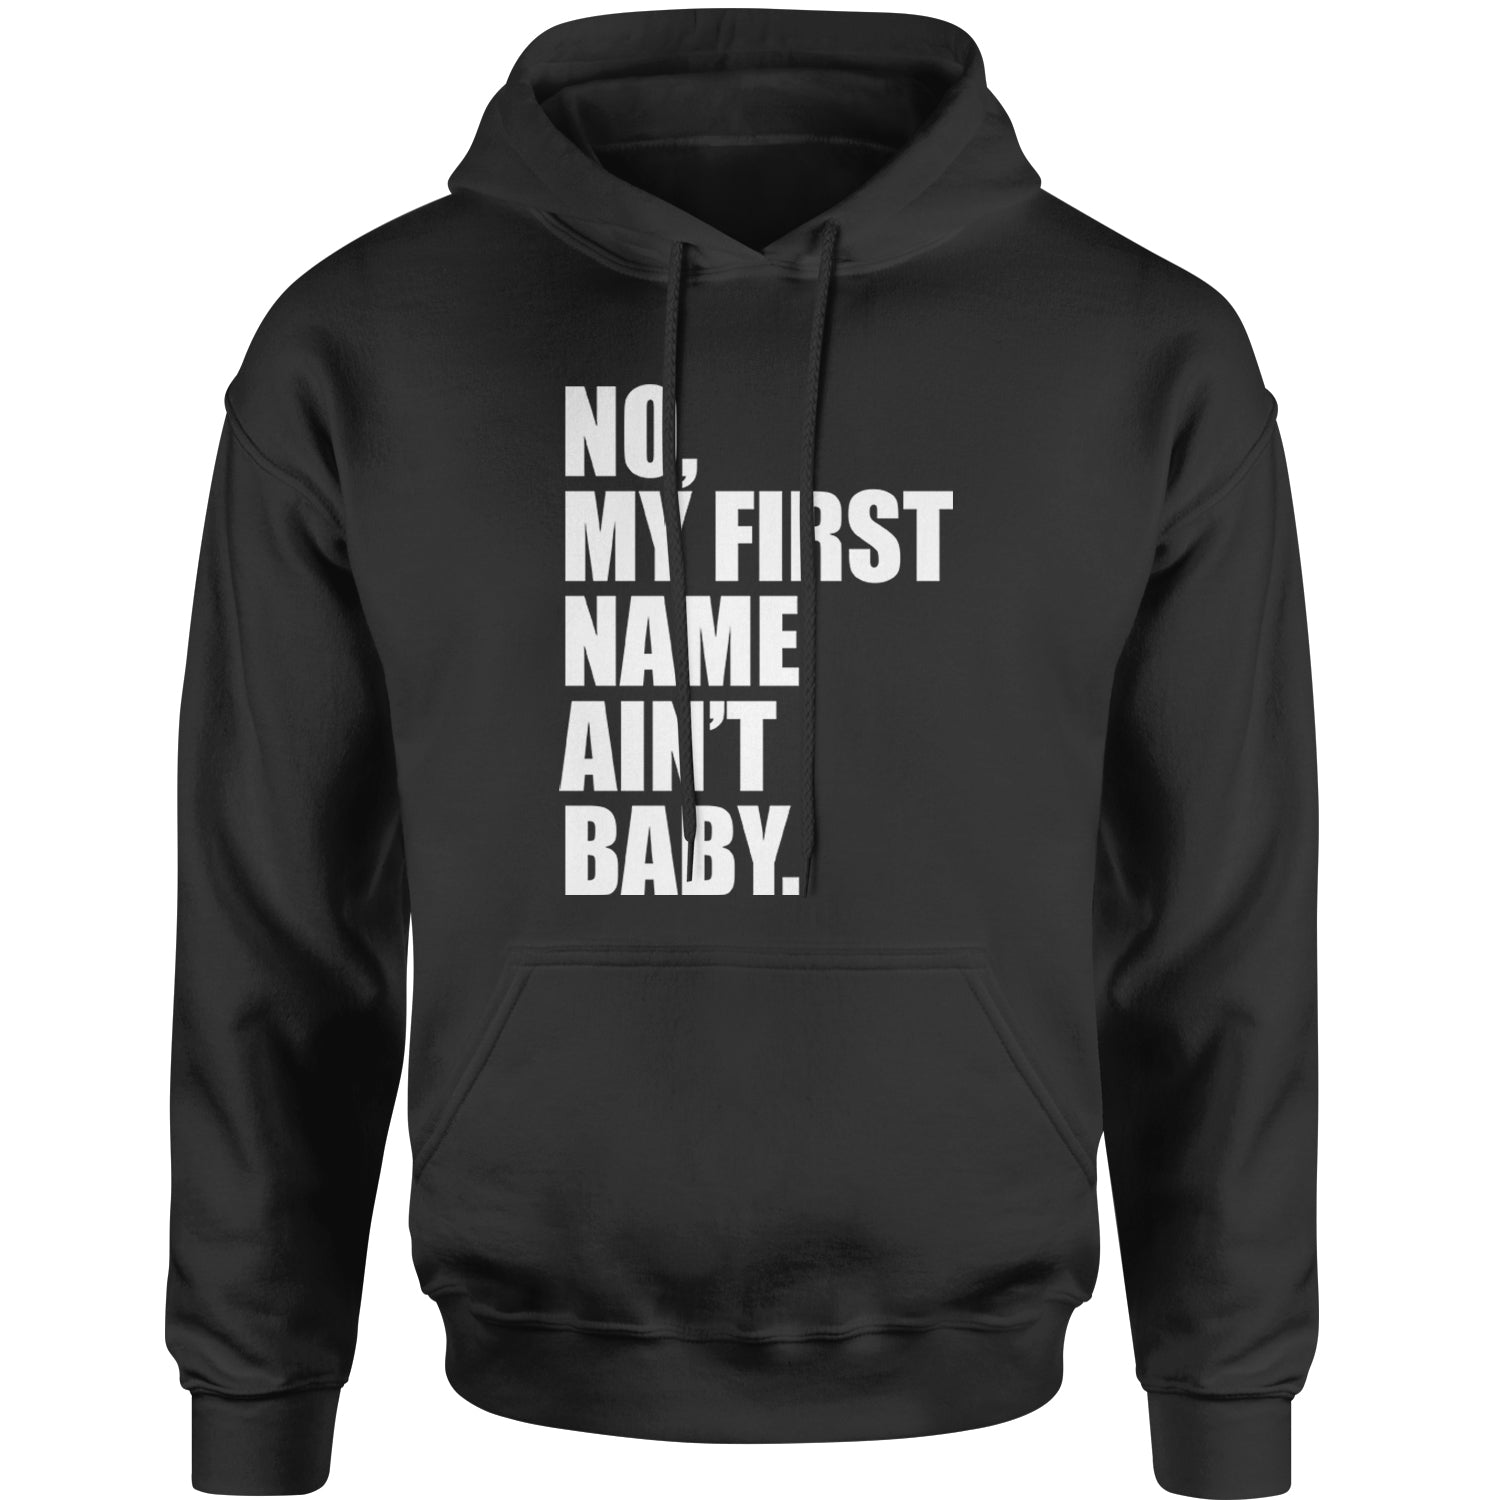 No My First Name Ain't Baby Together Again Adult Hoodie Sweatshirt